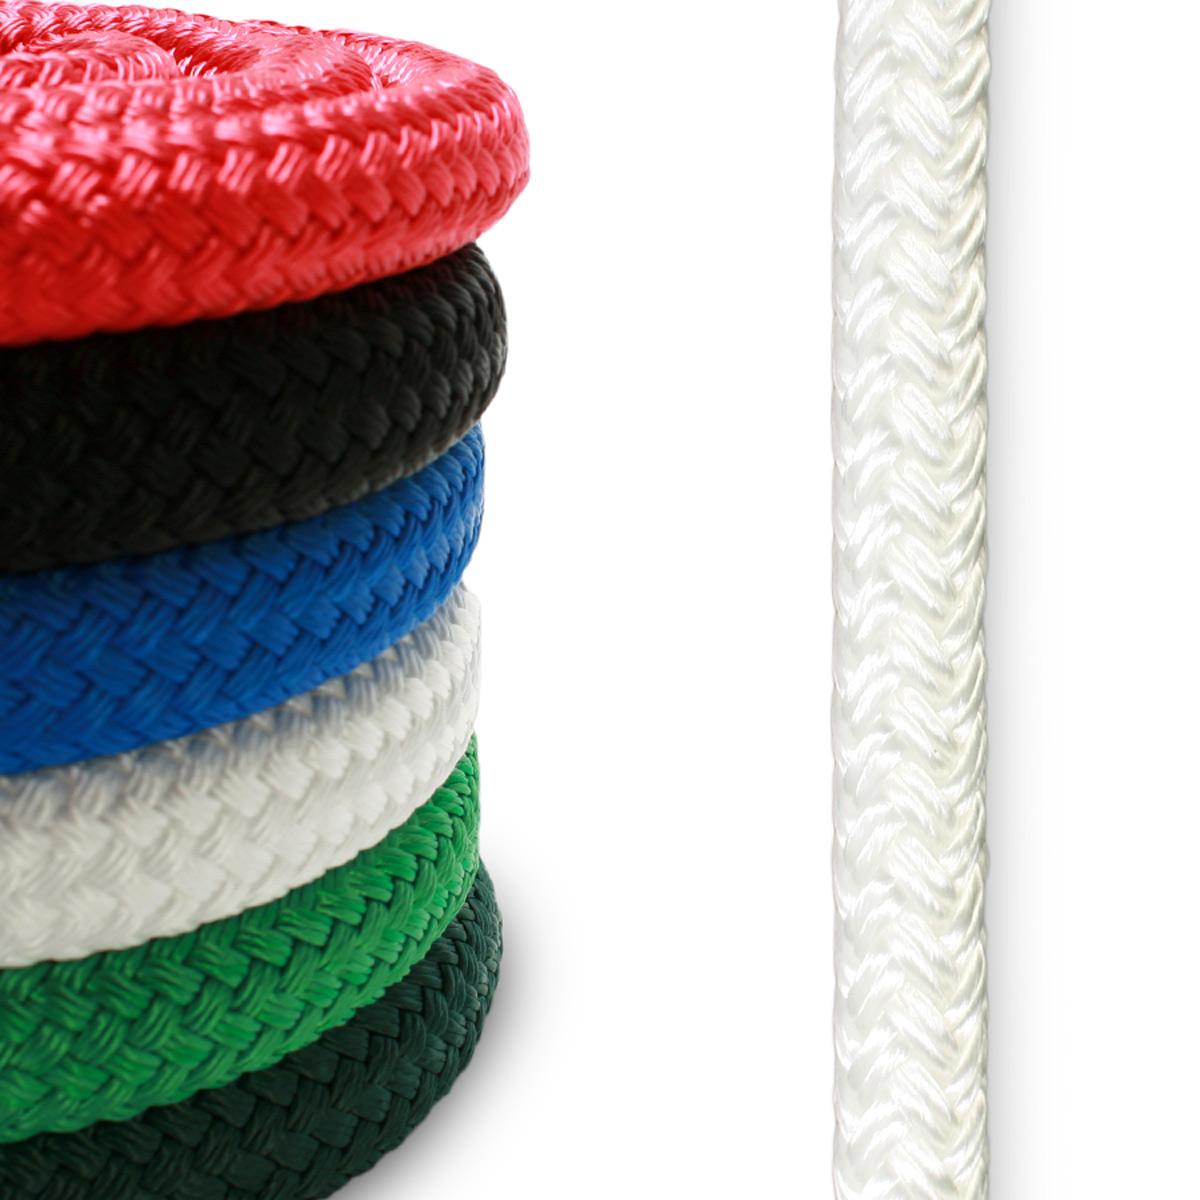 Solid Braid Nylon Rope in 1/8, 5/32, 3/16, 1/4, 5/16, 3/8, and 1/2